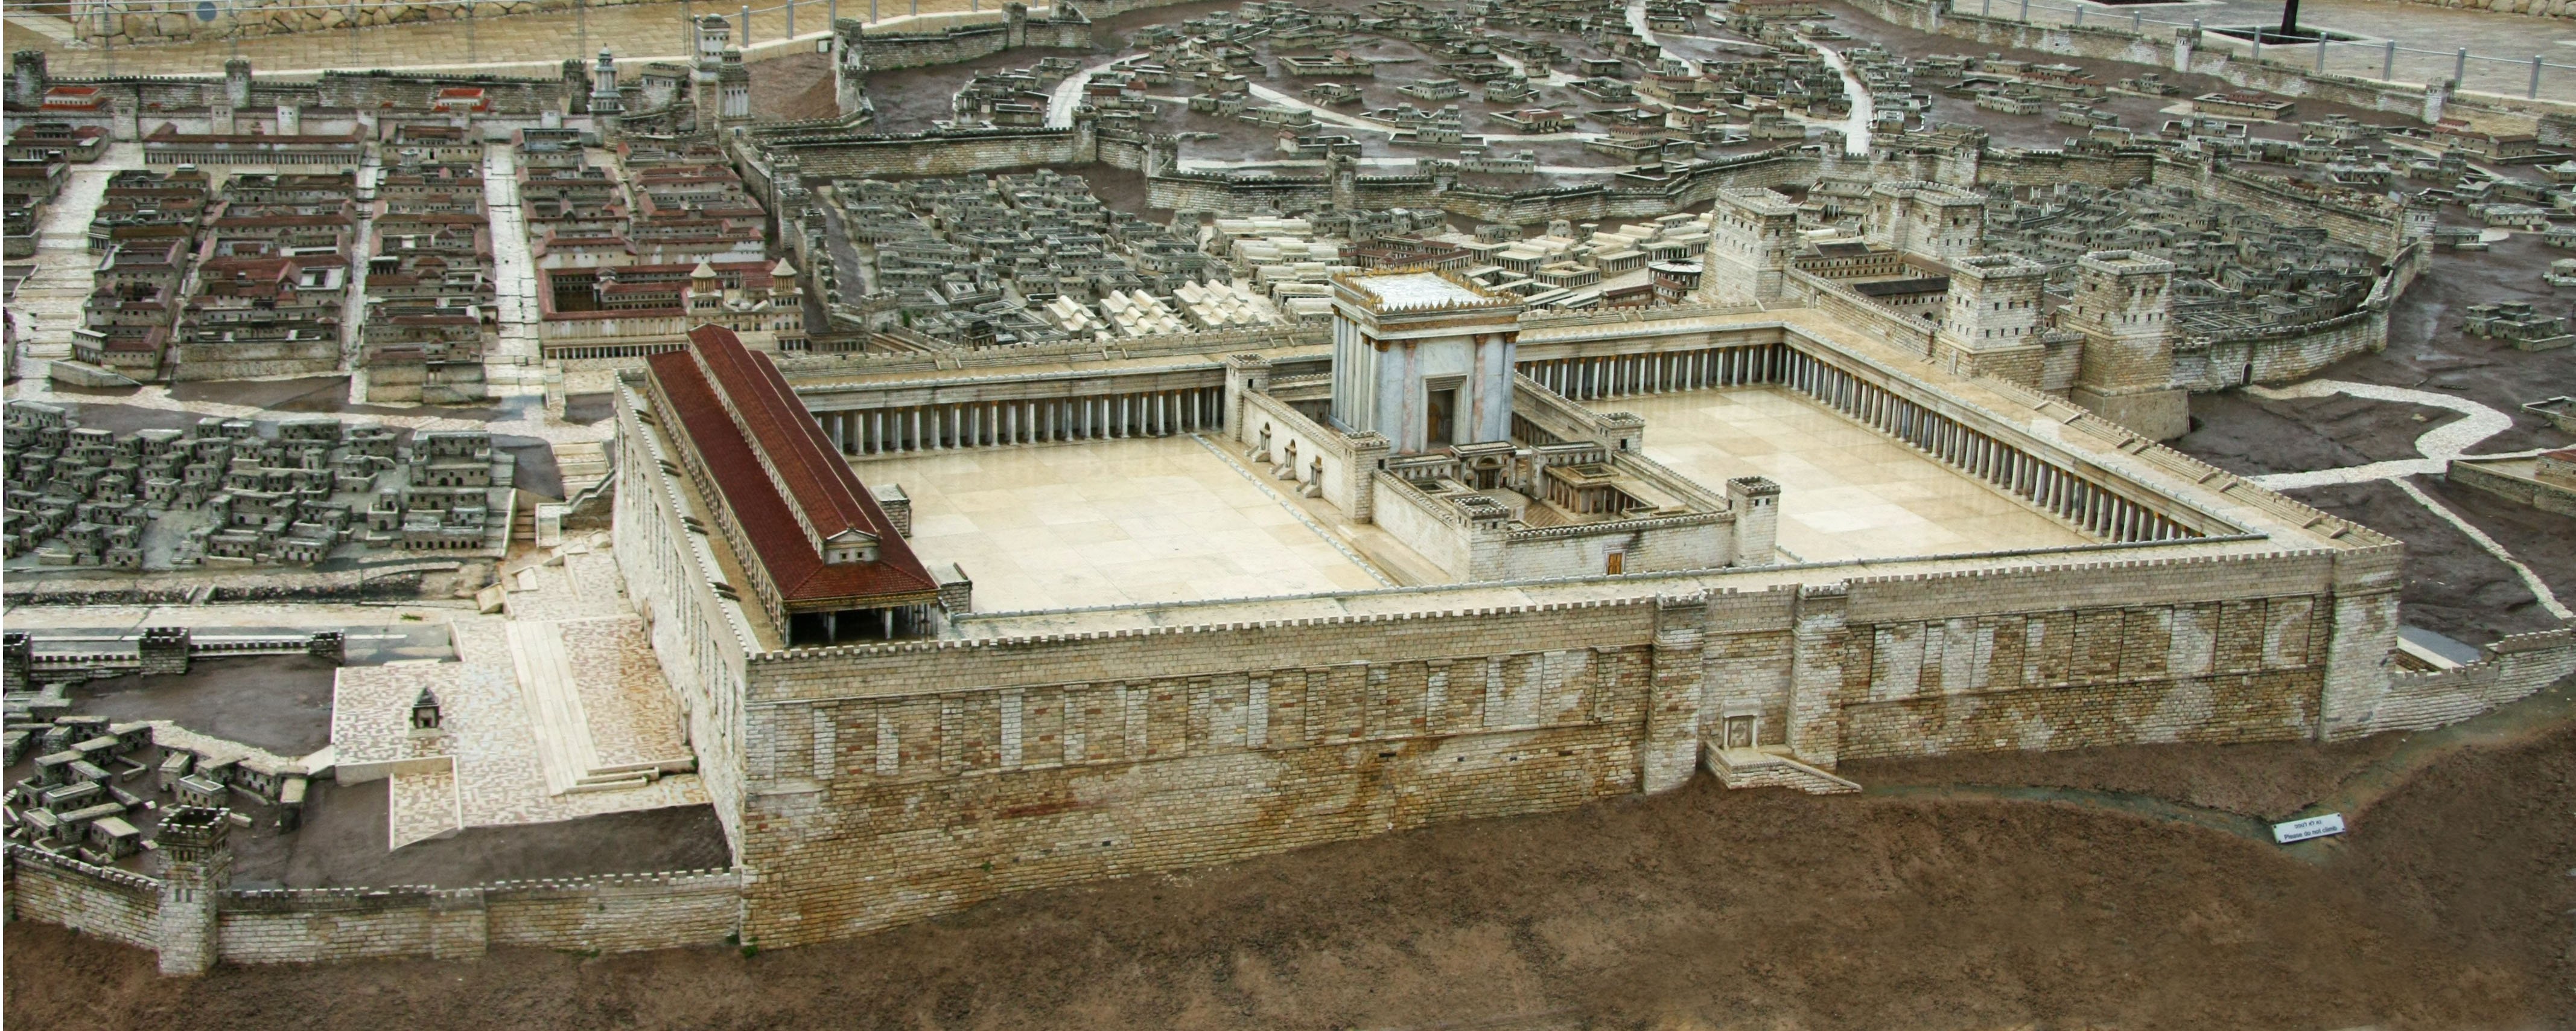 A model of the Second Temple in Jerusalem.